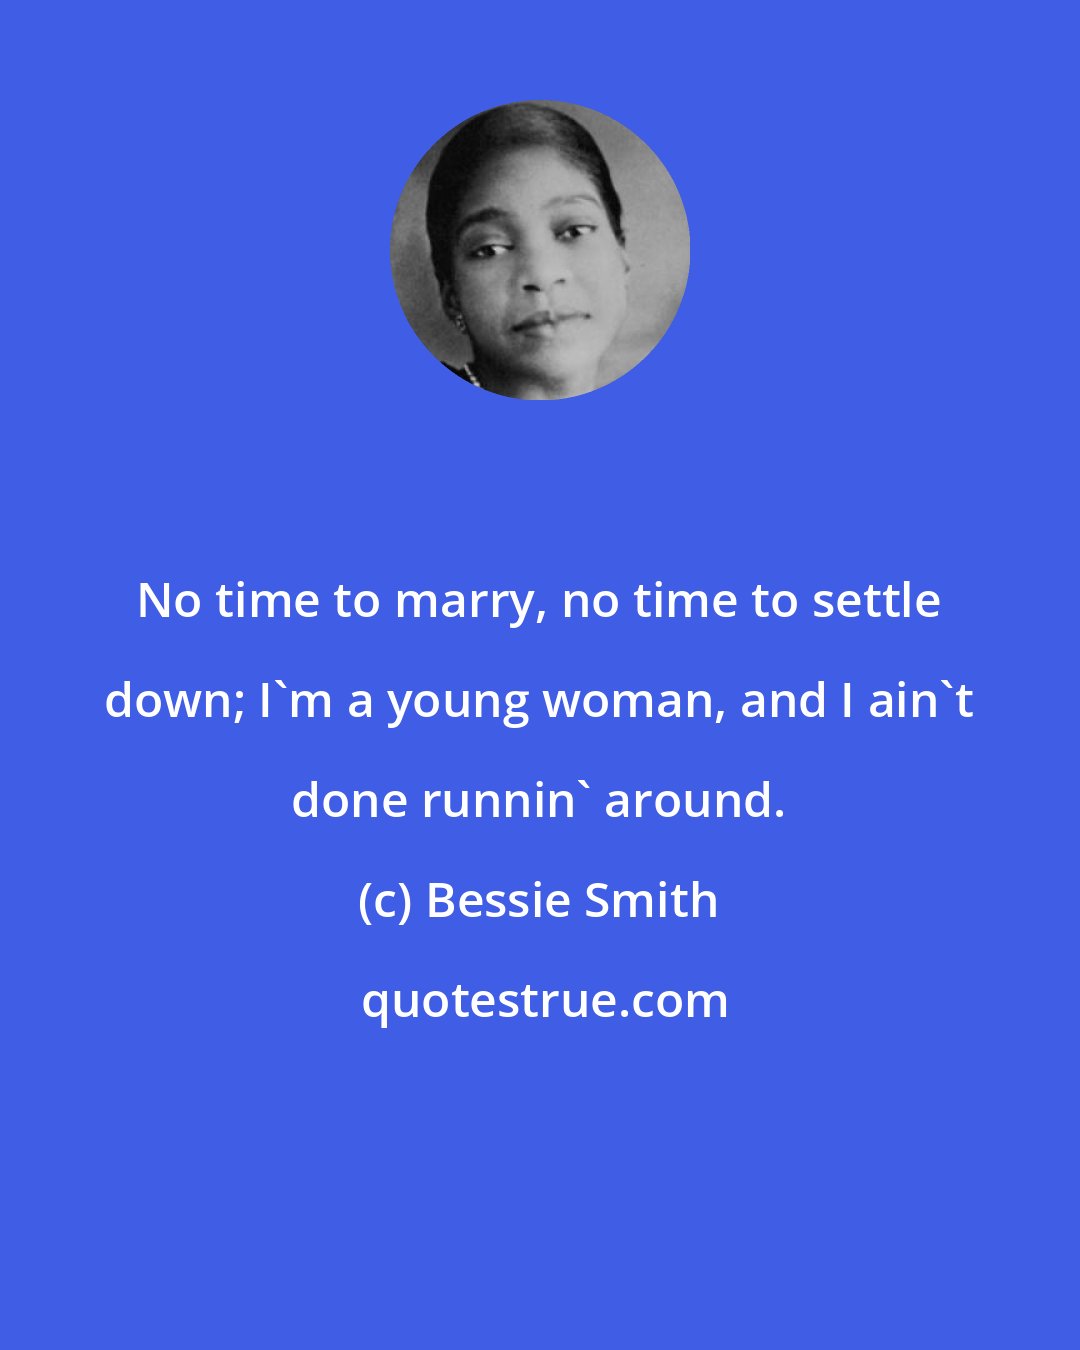 Bessie Smith: No time to marry, no time to settle down; I'm a young woman, and I ain't done runnin' around.